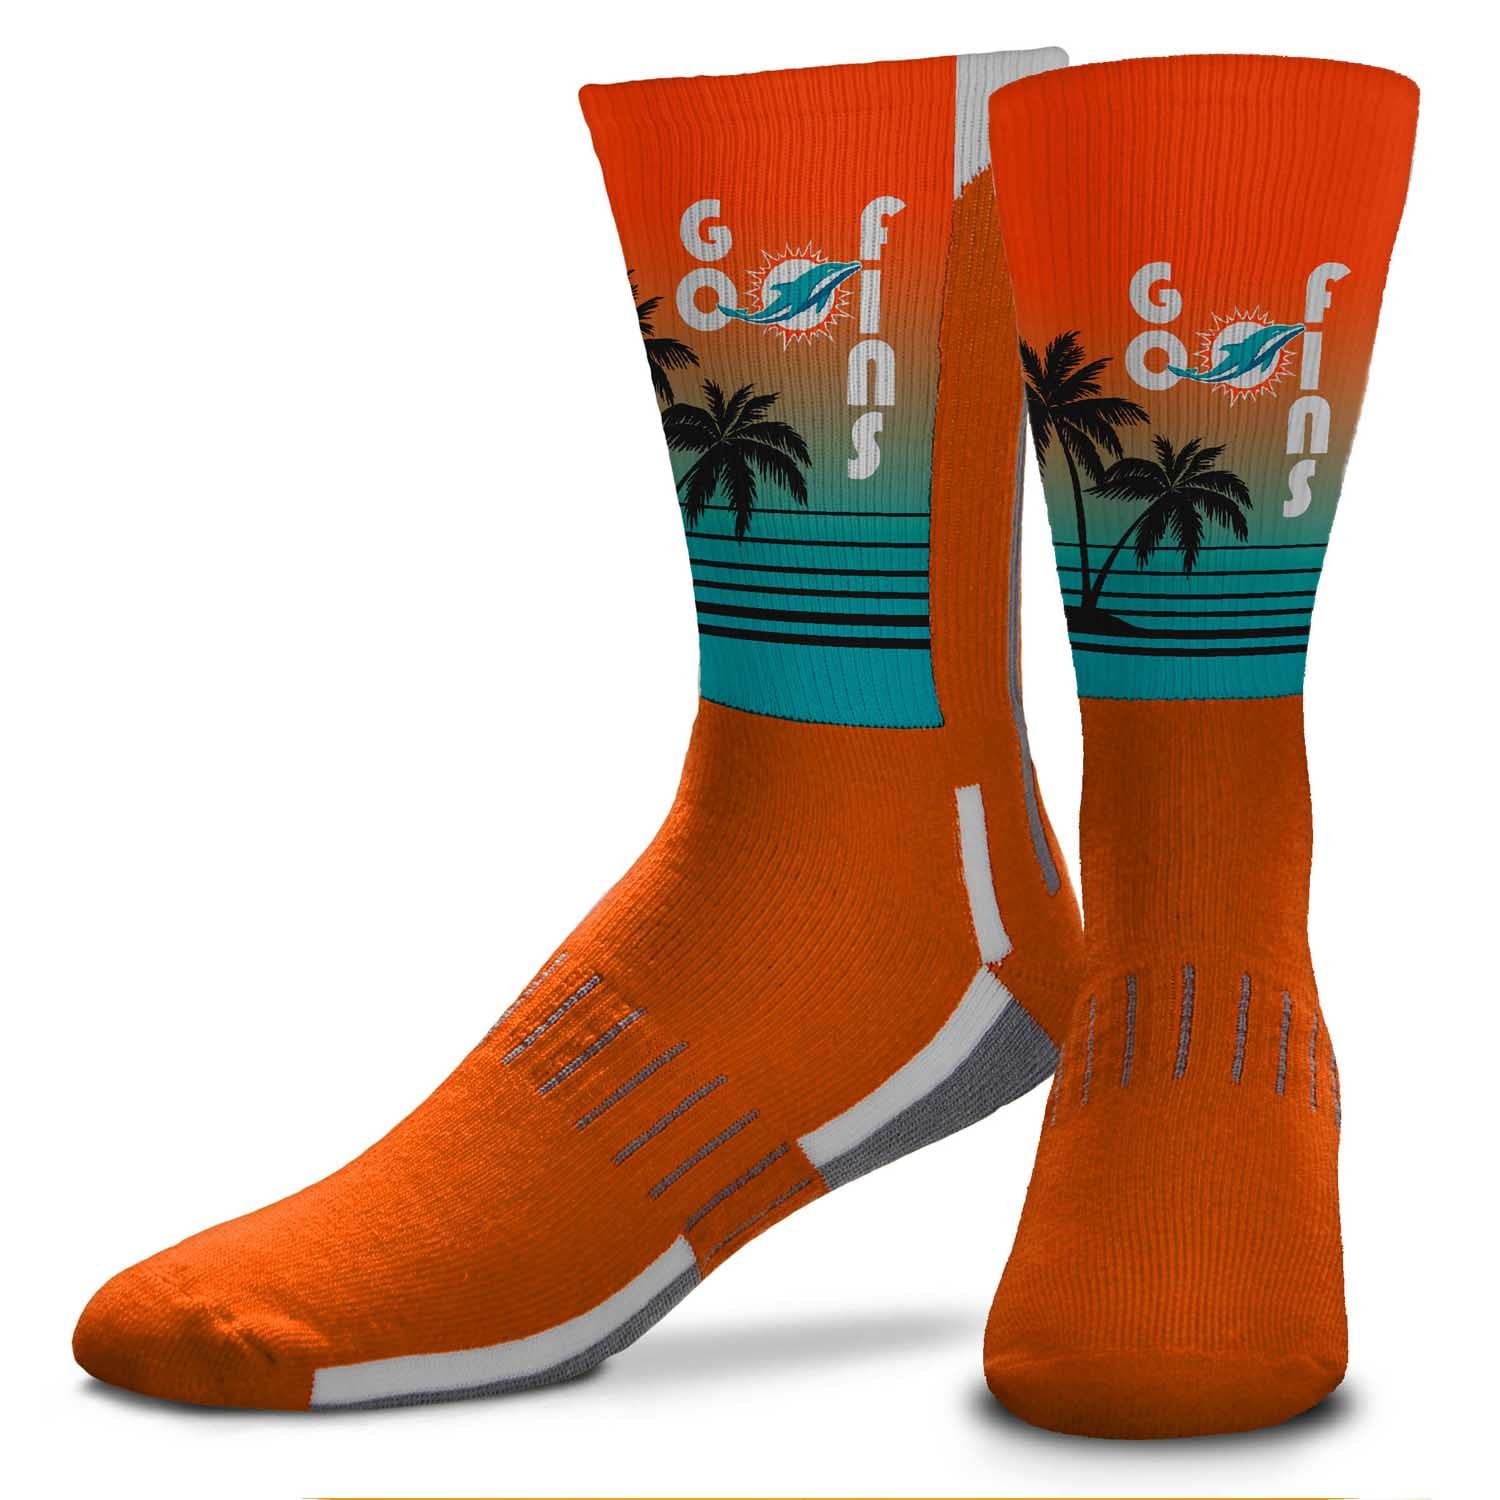 Miami Dolphins Game Day Outfit  Nfl outfits, Gameday outfit